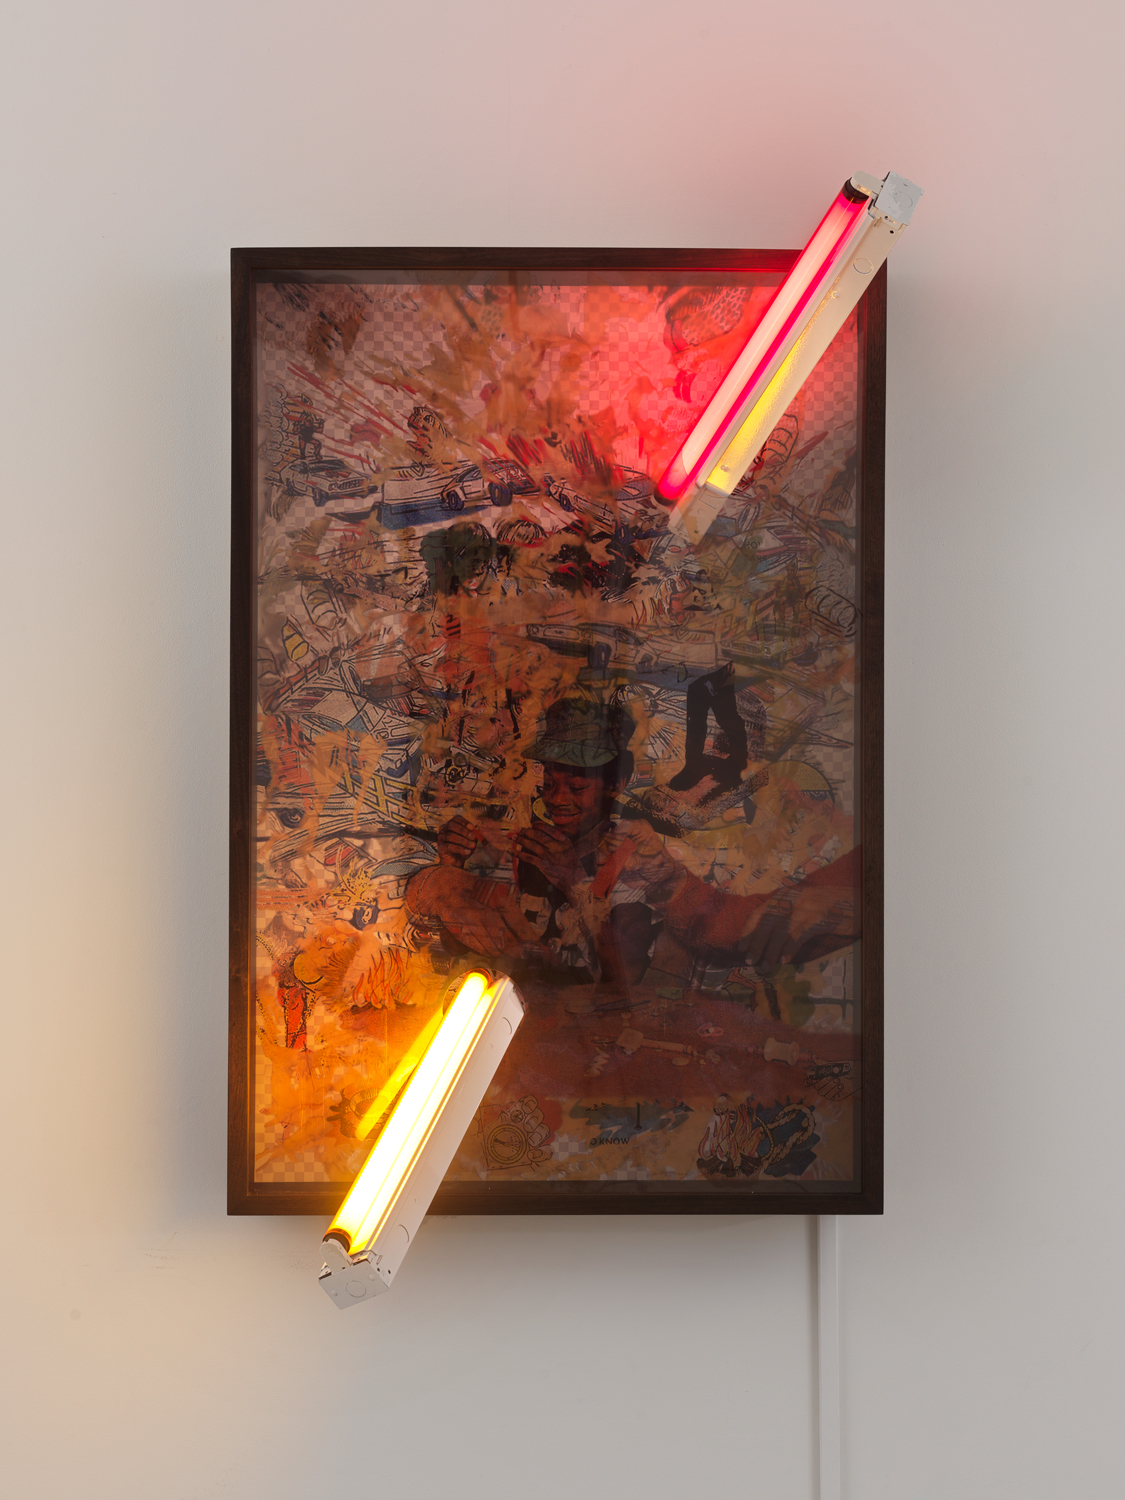 Jibade-Khalil Huffman, Untitled (Proof), 2020, Transparencies in lightbox, fluorescent fixtures, fluorescent tubes with color tinting, 50.75h x 31.34w x 26.5d in.